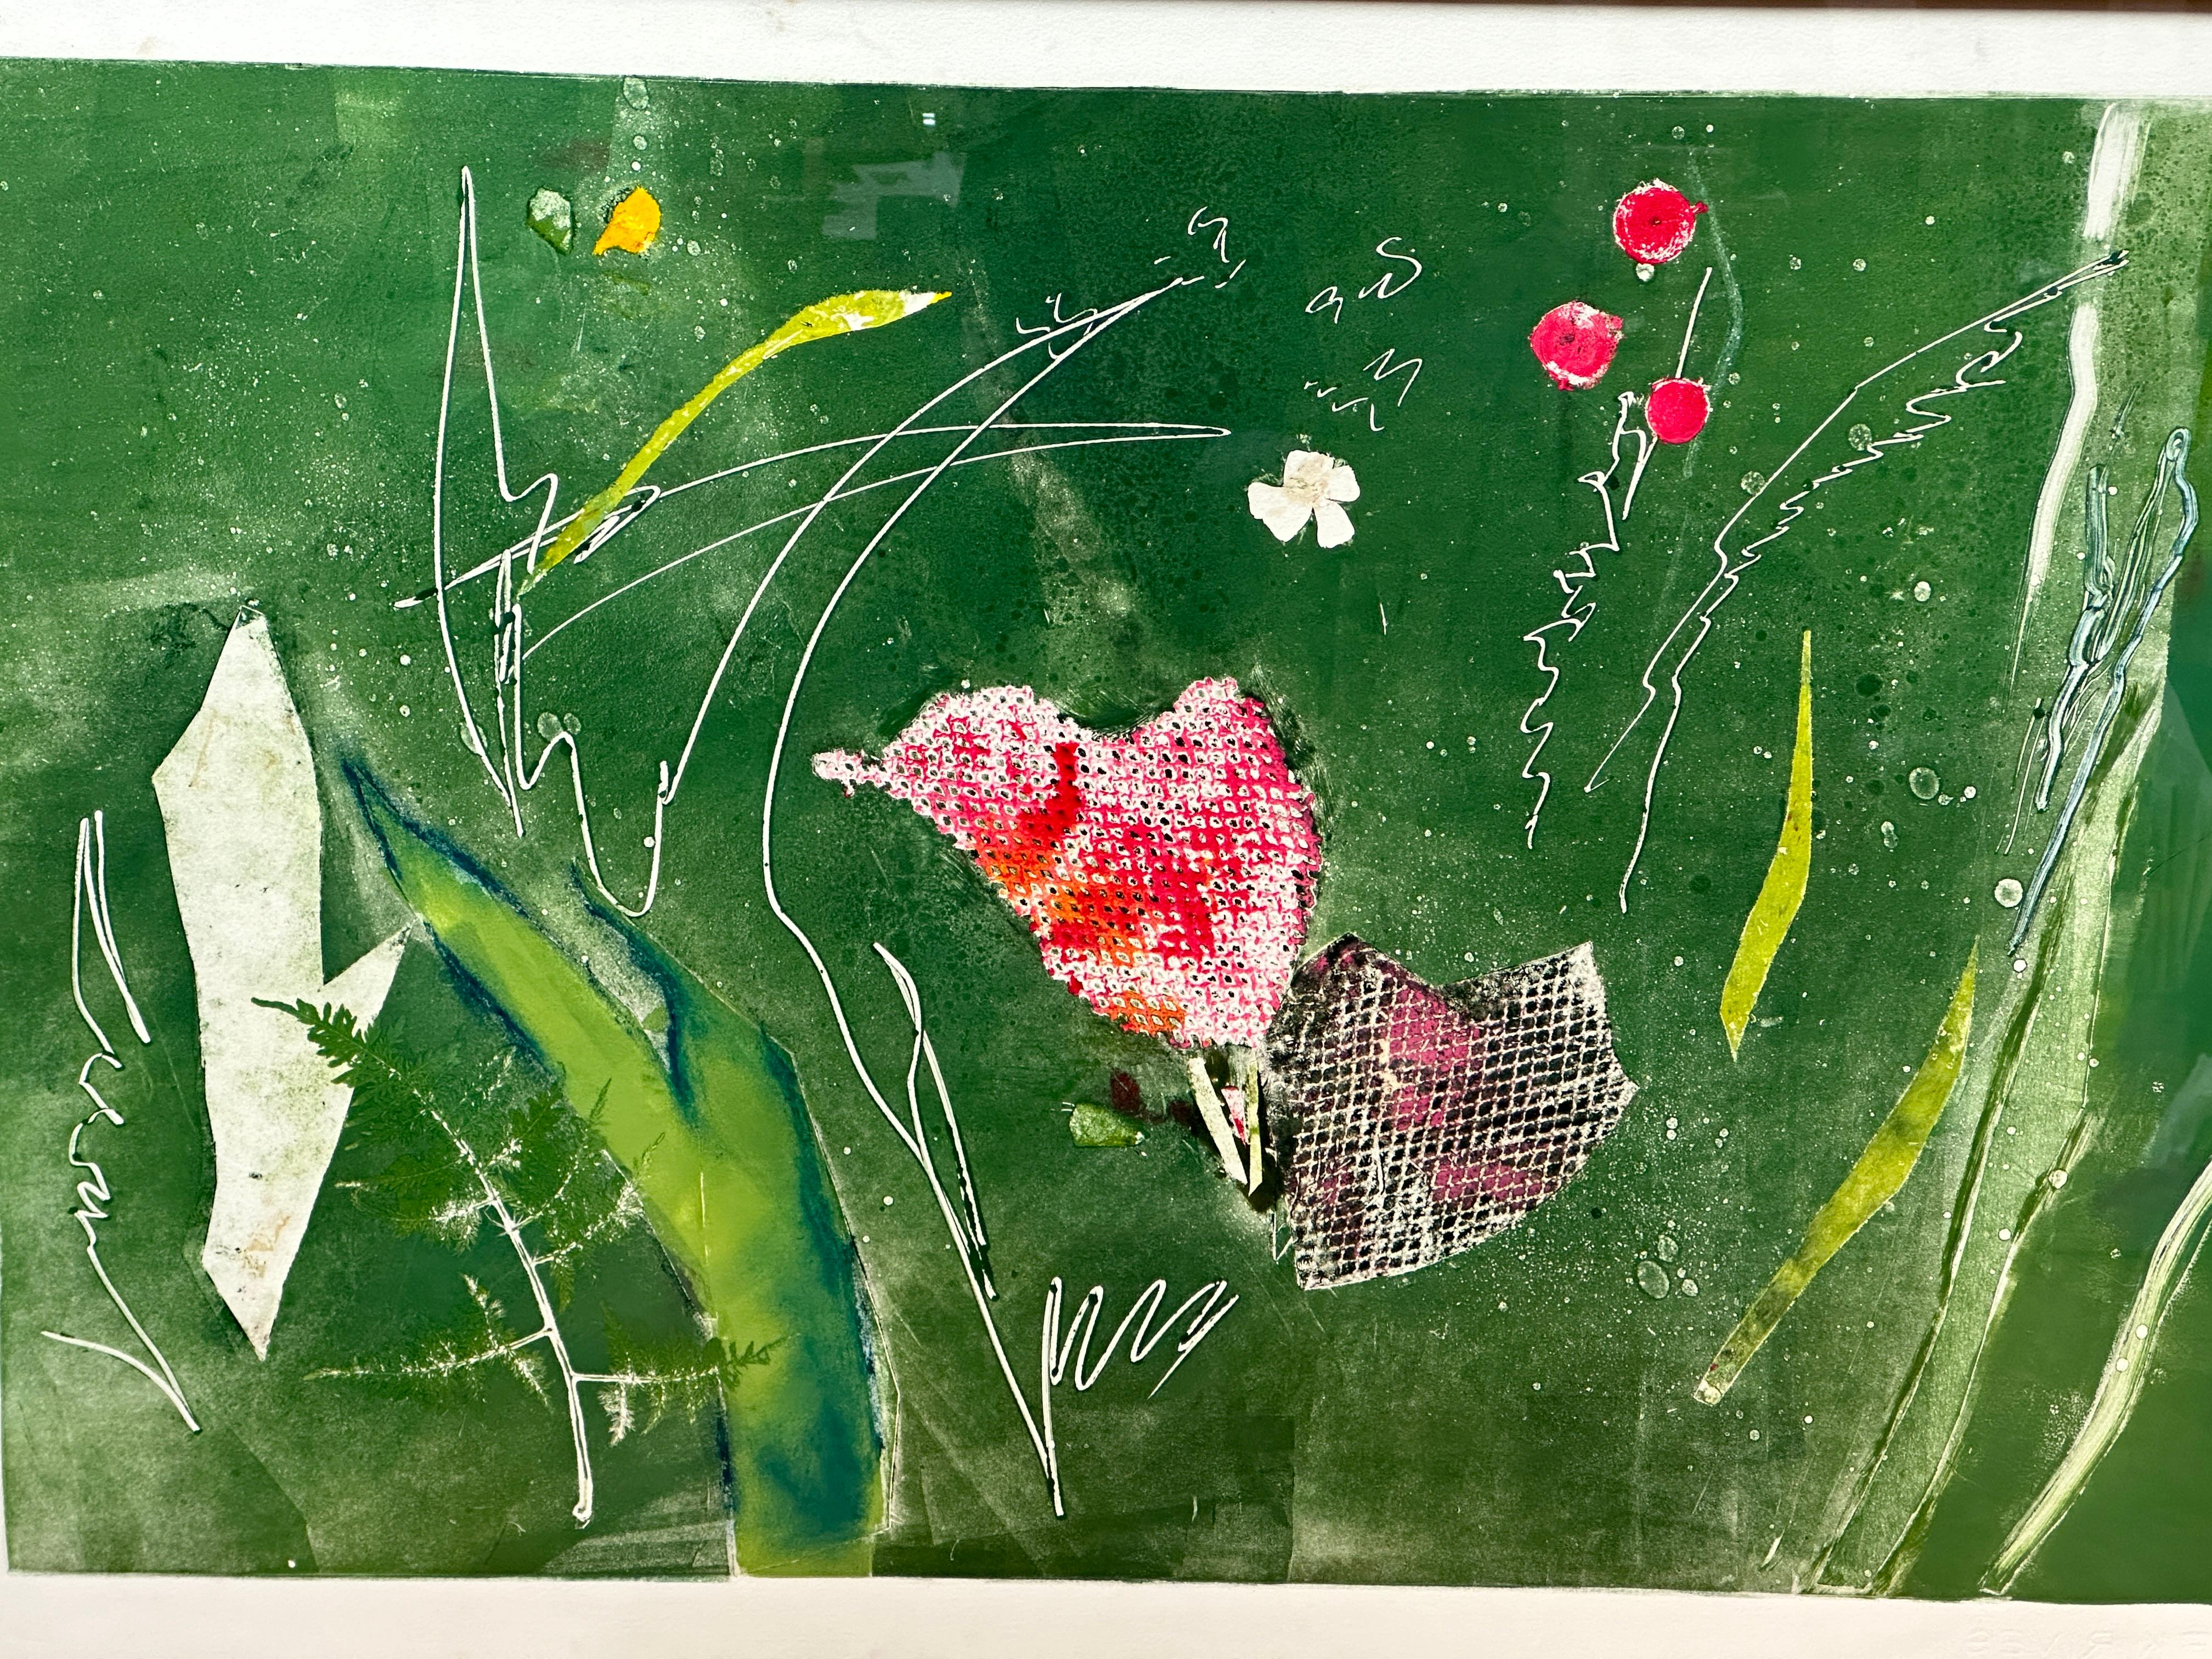  “Whispers of Eternity” Green and Pink Semi Abstract Lithograph - Print by Unknown